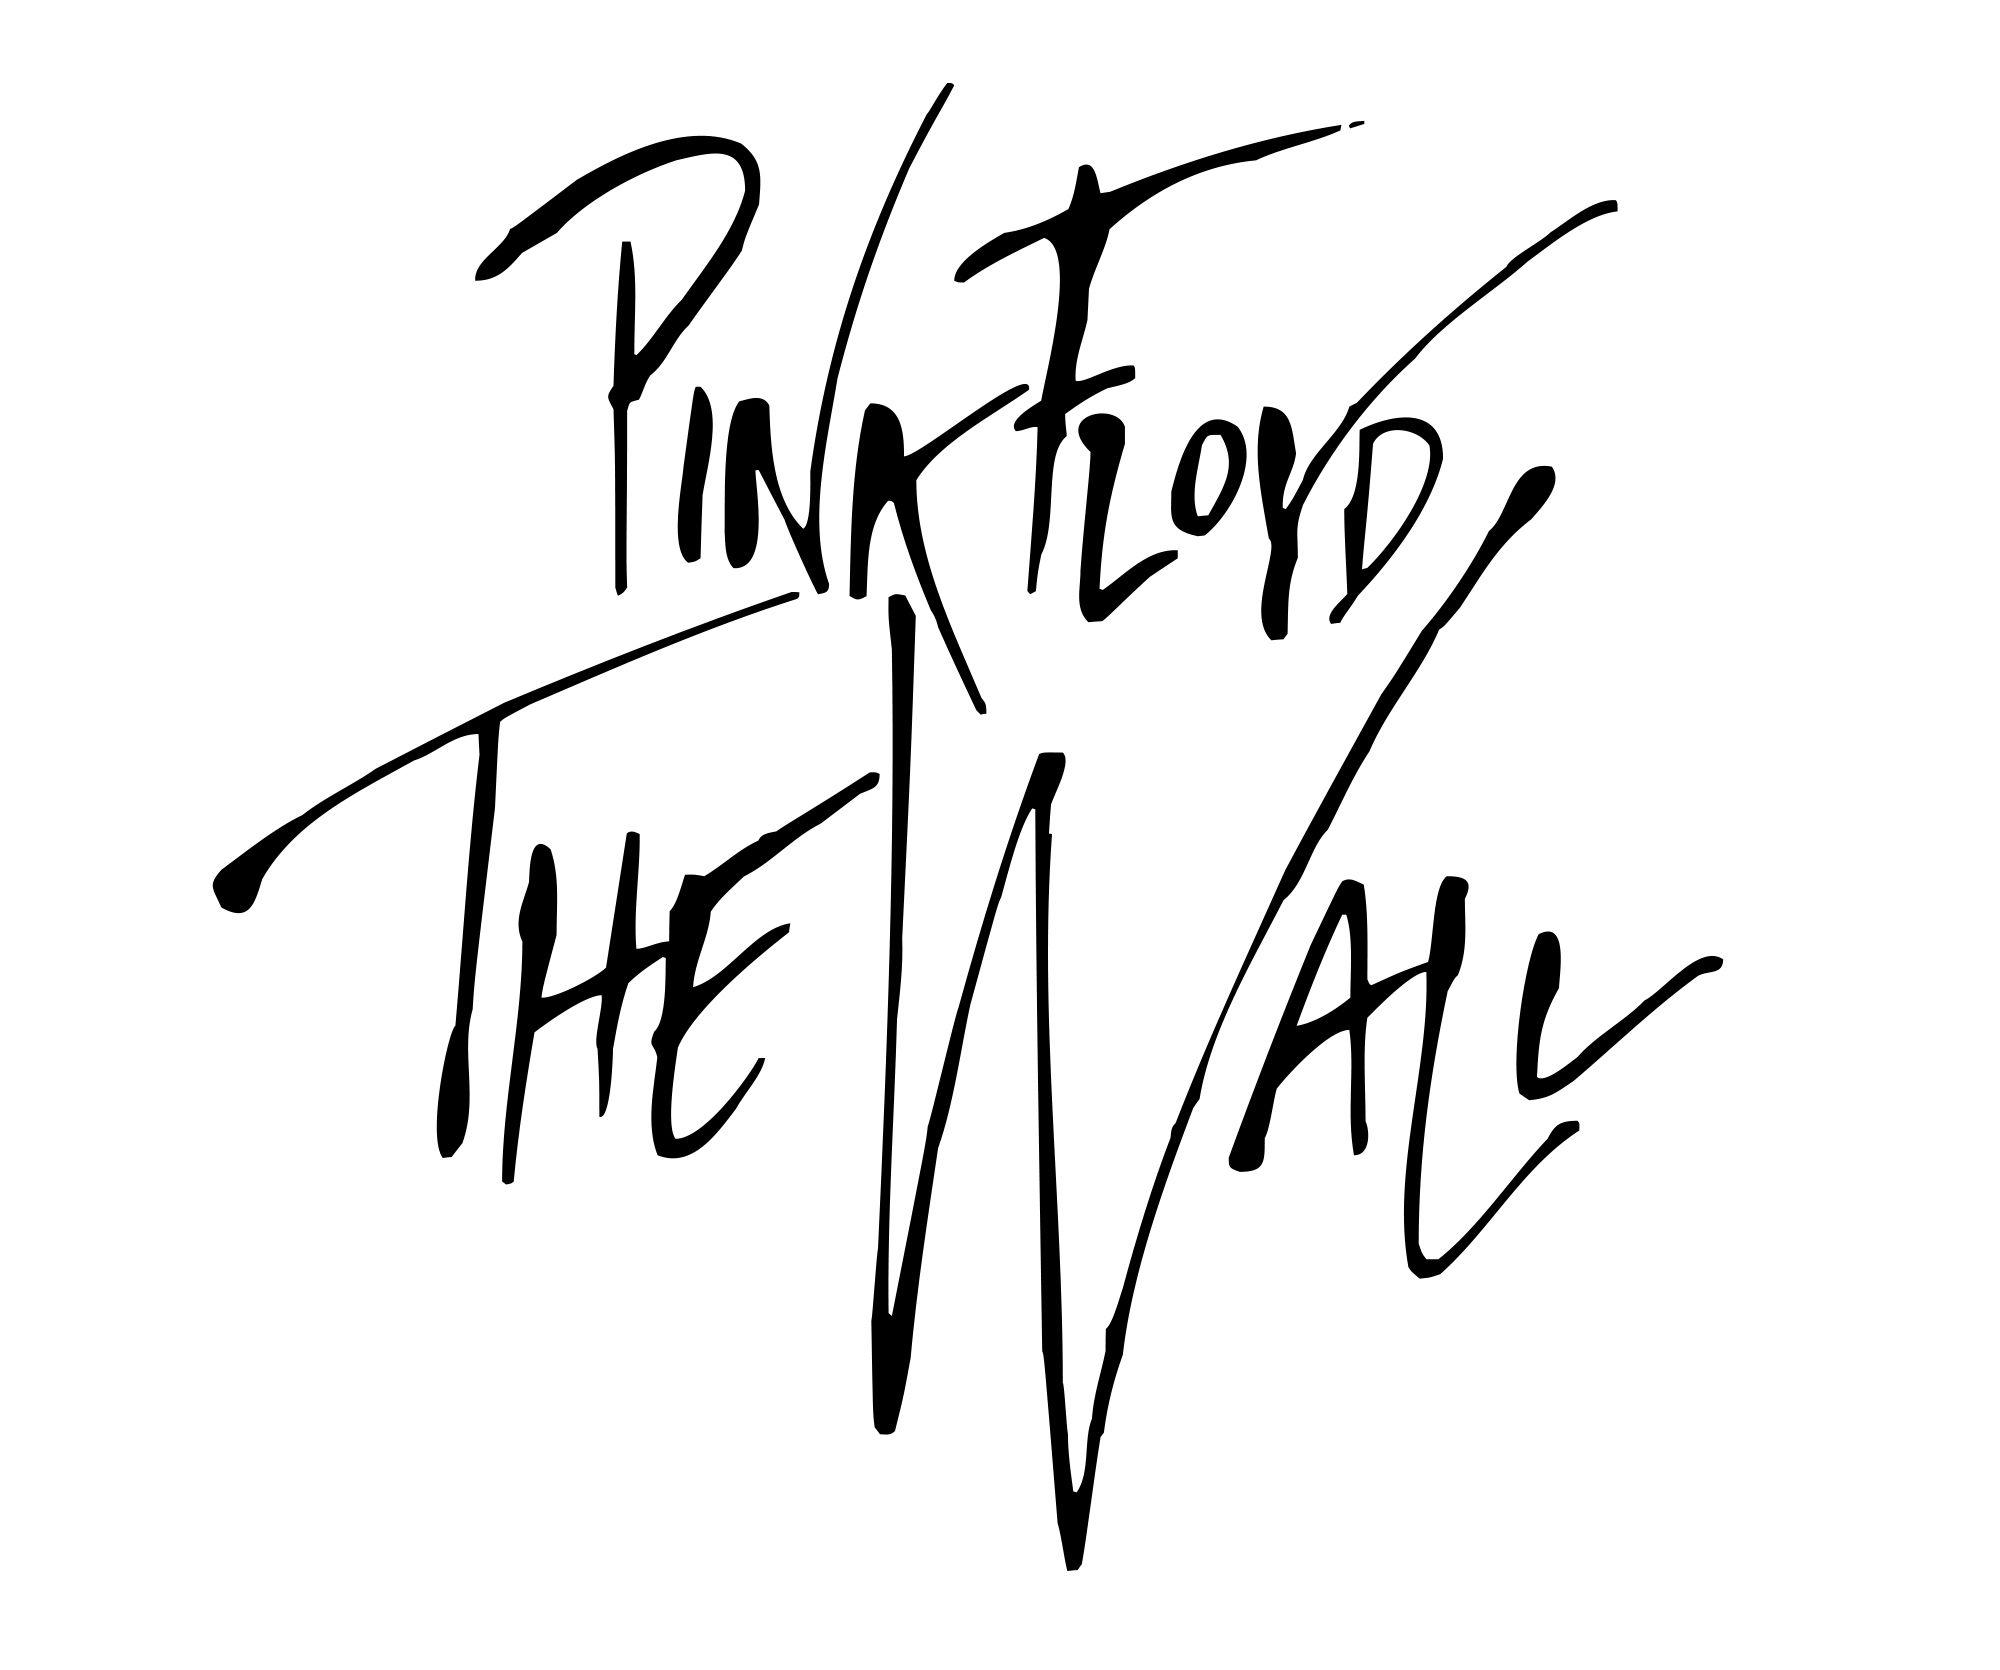 Pink Floyd Logo - Pink Floyd Logo, Pink Floyd Symbol, Meaning, History and Evolution